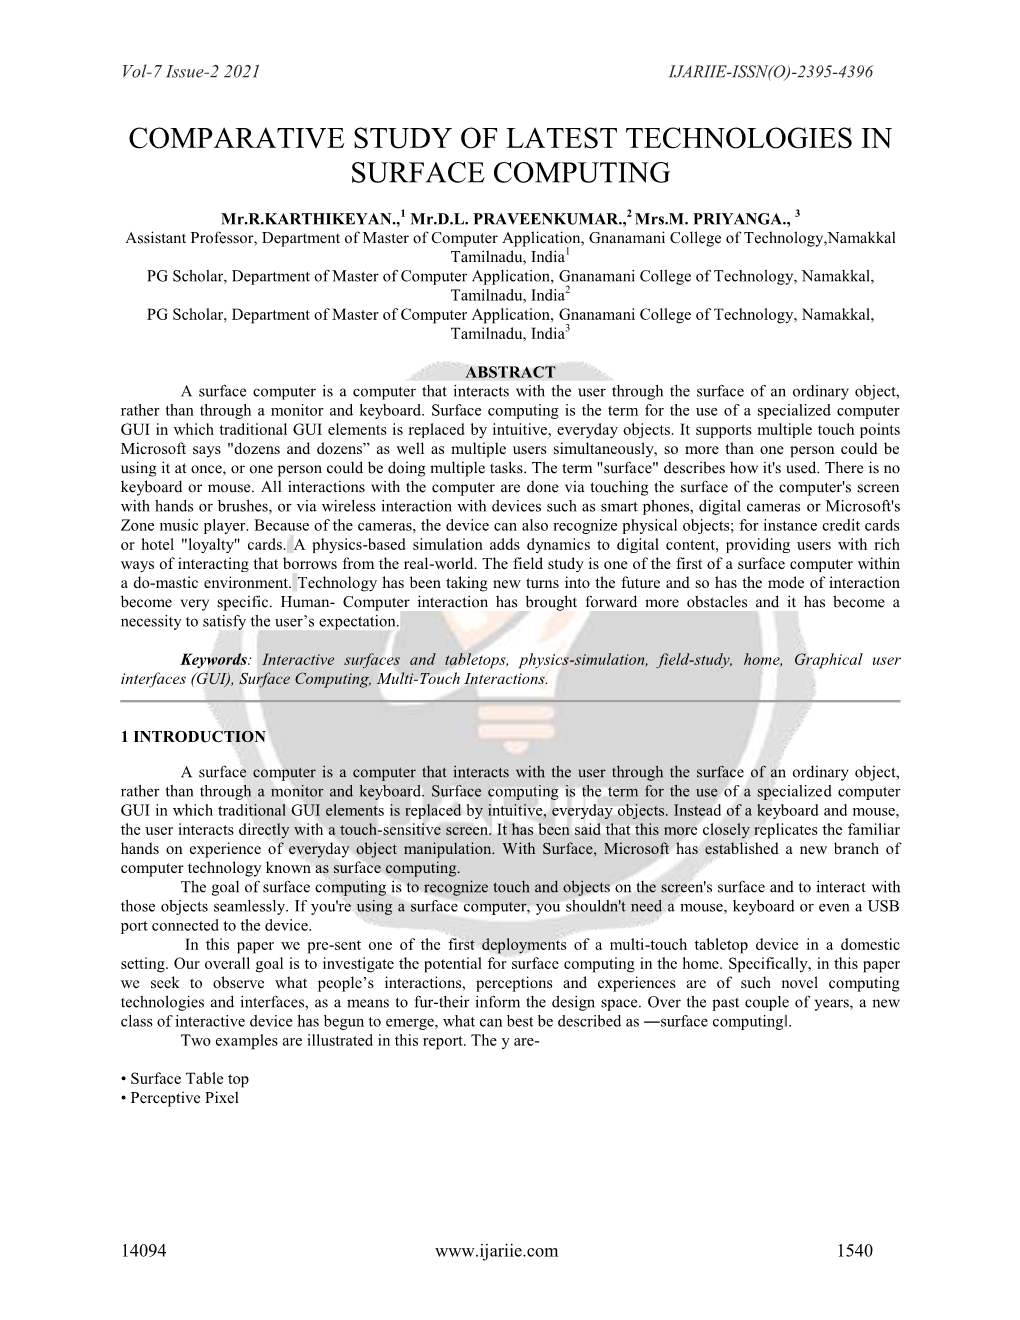 Comparative Study of Latest Technologies in Surface Computing